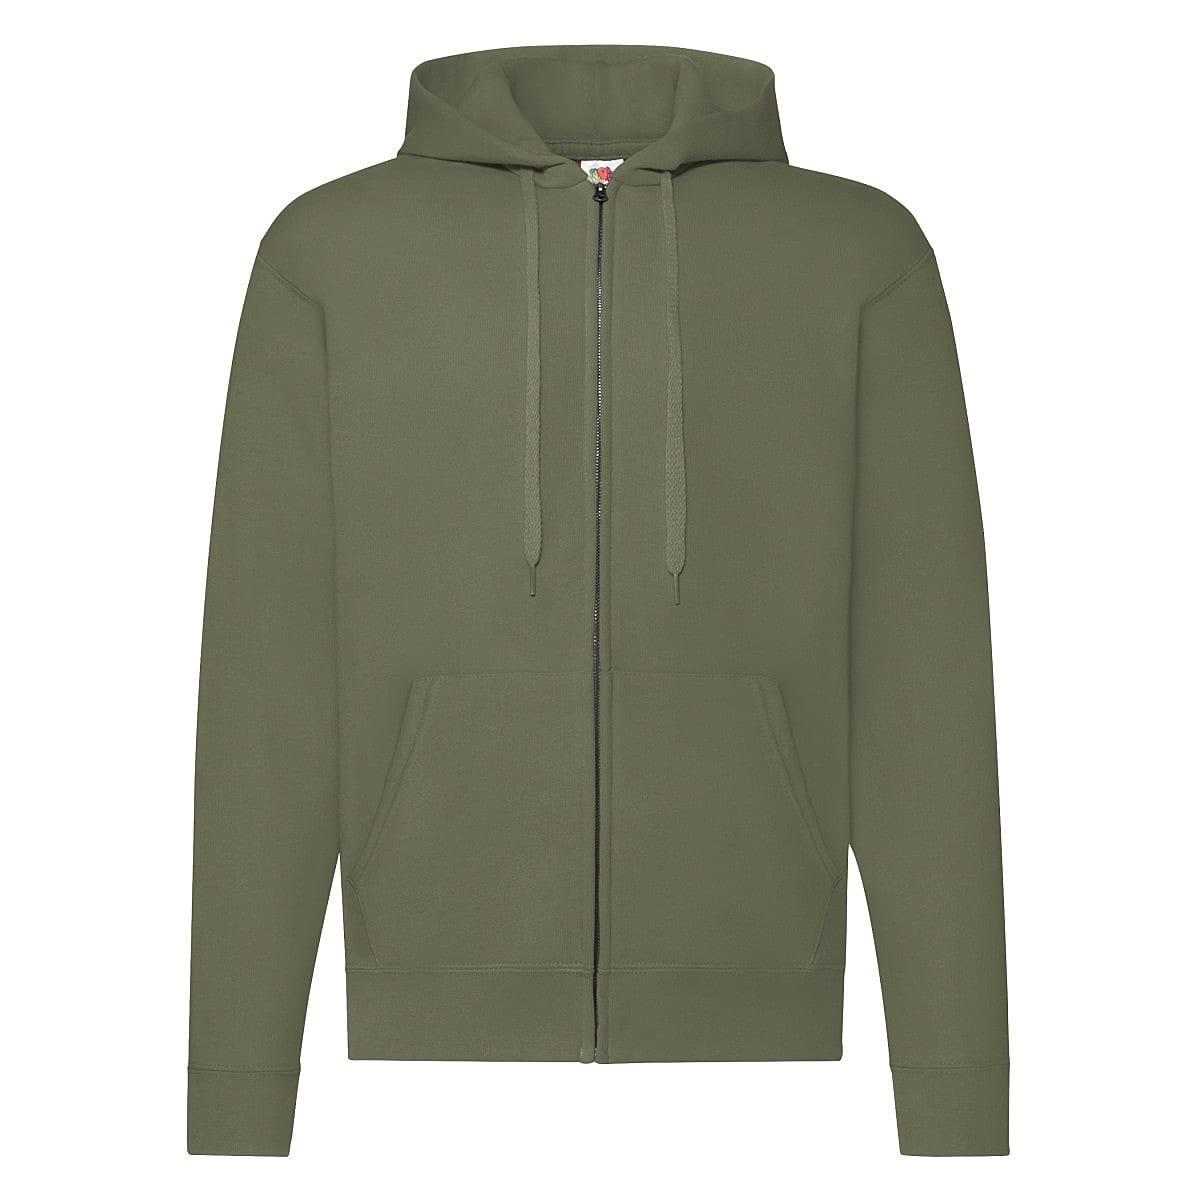 Fruit Of The Loom Mens Classic Full-Zip Hoodie in Classic Olive (Product Code: 62062)